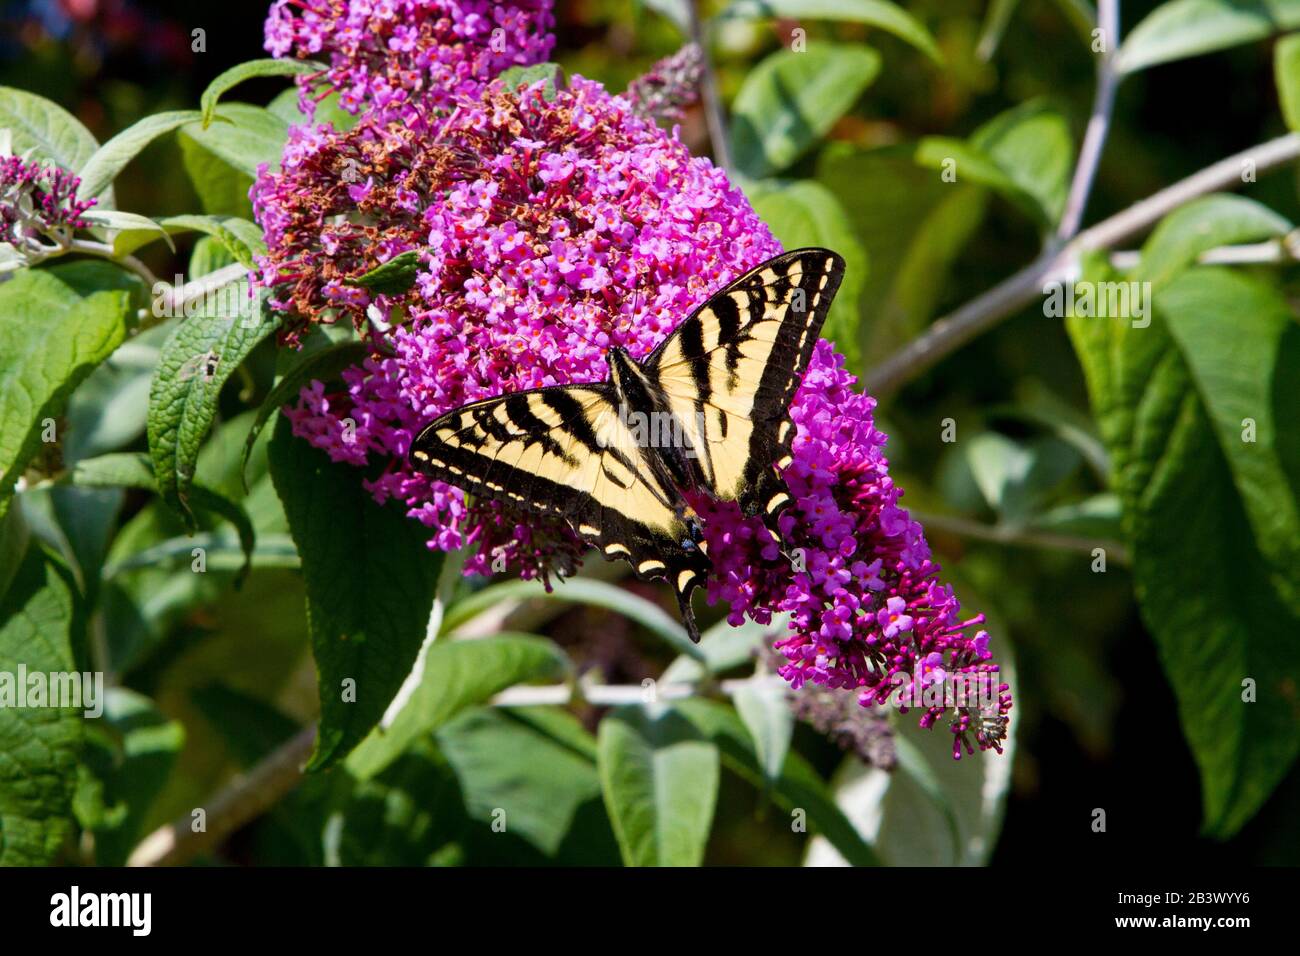 Western Tiger Swallowtail (Papilio rutulus) butterfly pollinating a buddleja flower in a garden in Nanaimo, Vancouver Island, BC, Canada Stock Photo